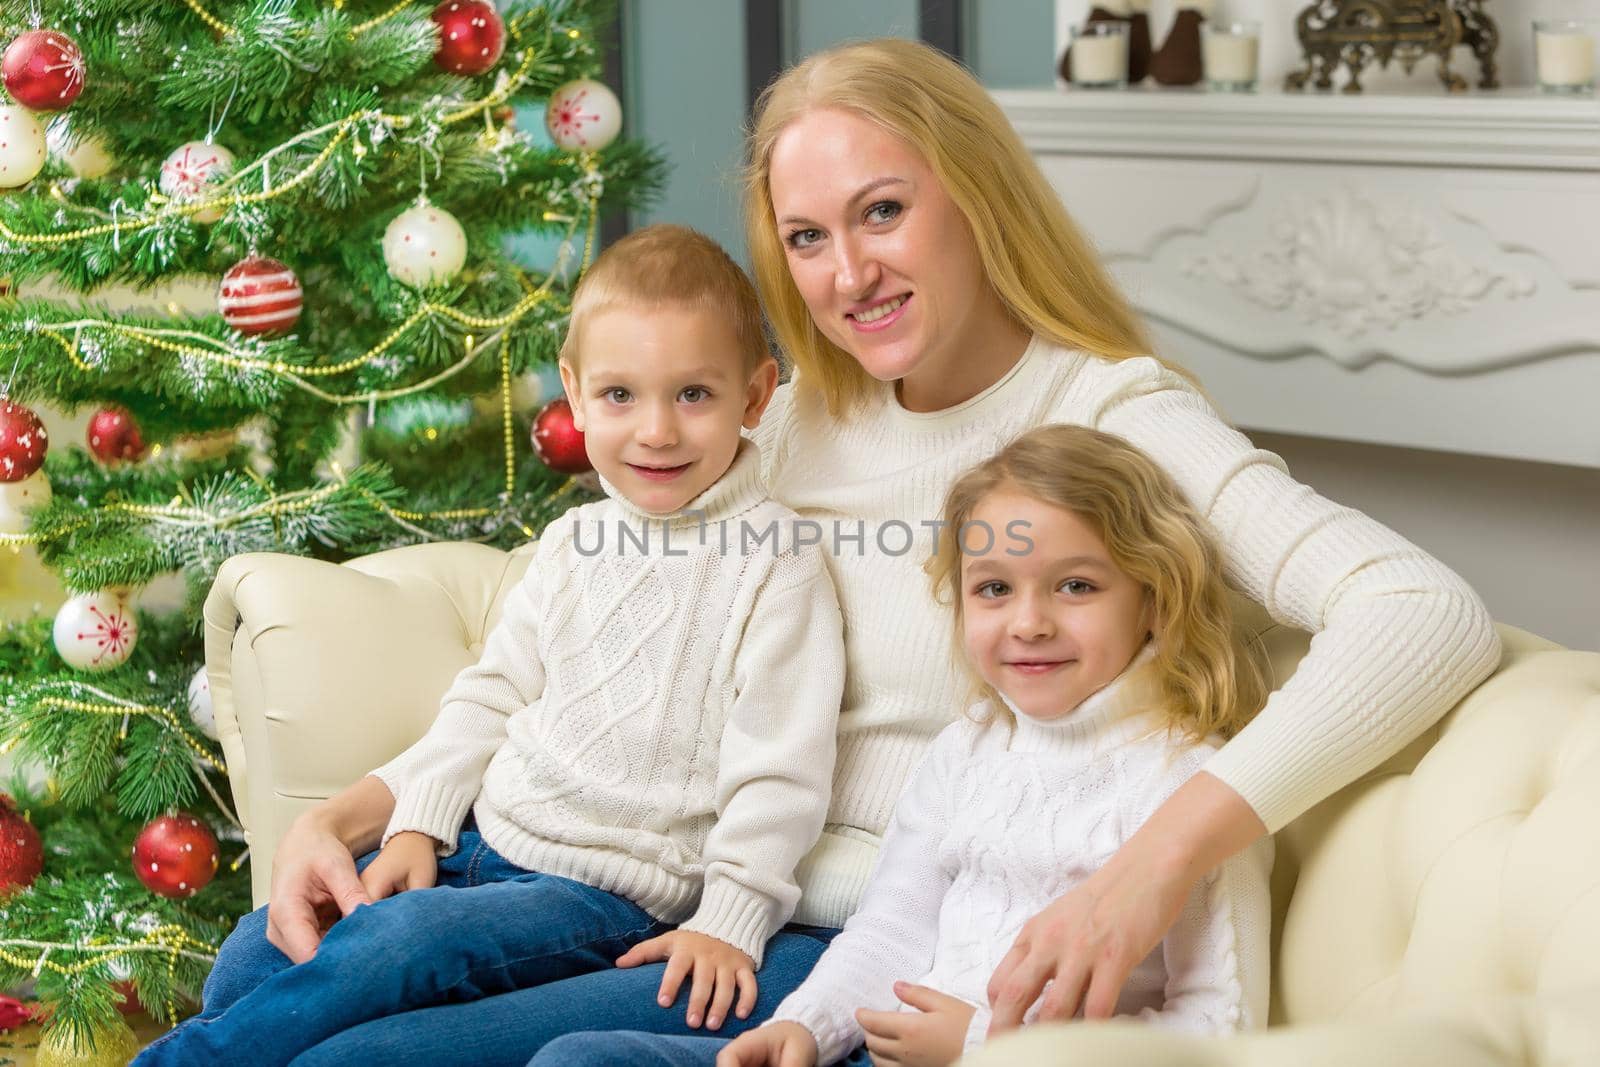 Happy Family Sitting on the Sofa in Christmas Interior with Decorated Fir Tree and Fireplace, Mom Hugging her Cute Little Kids, Her Son and Daughter Looking Lovingly at Her